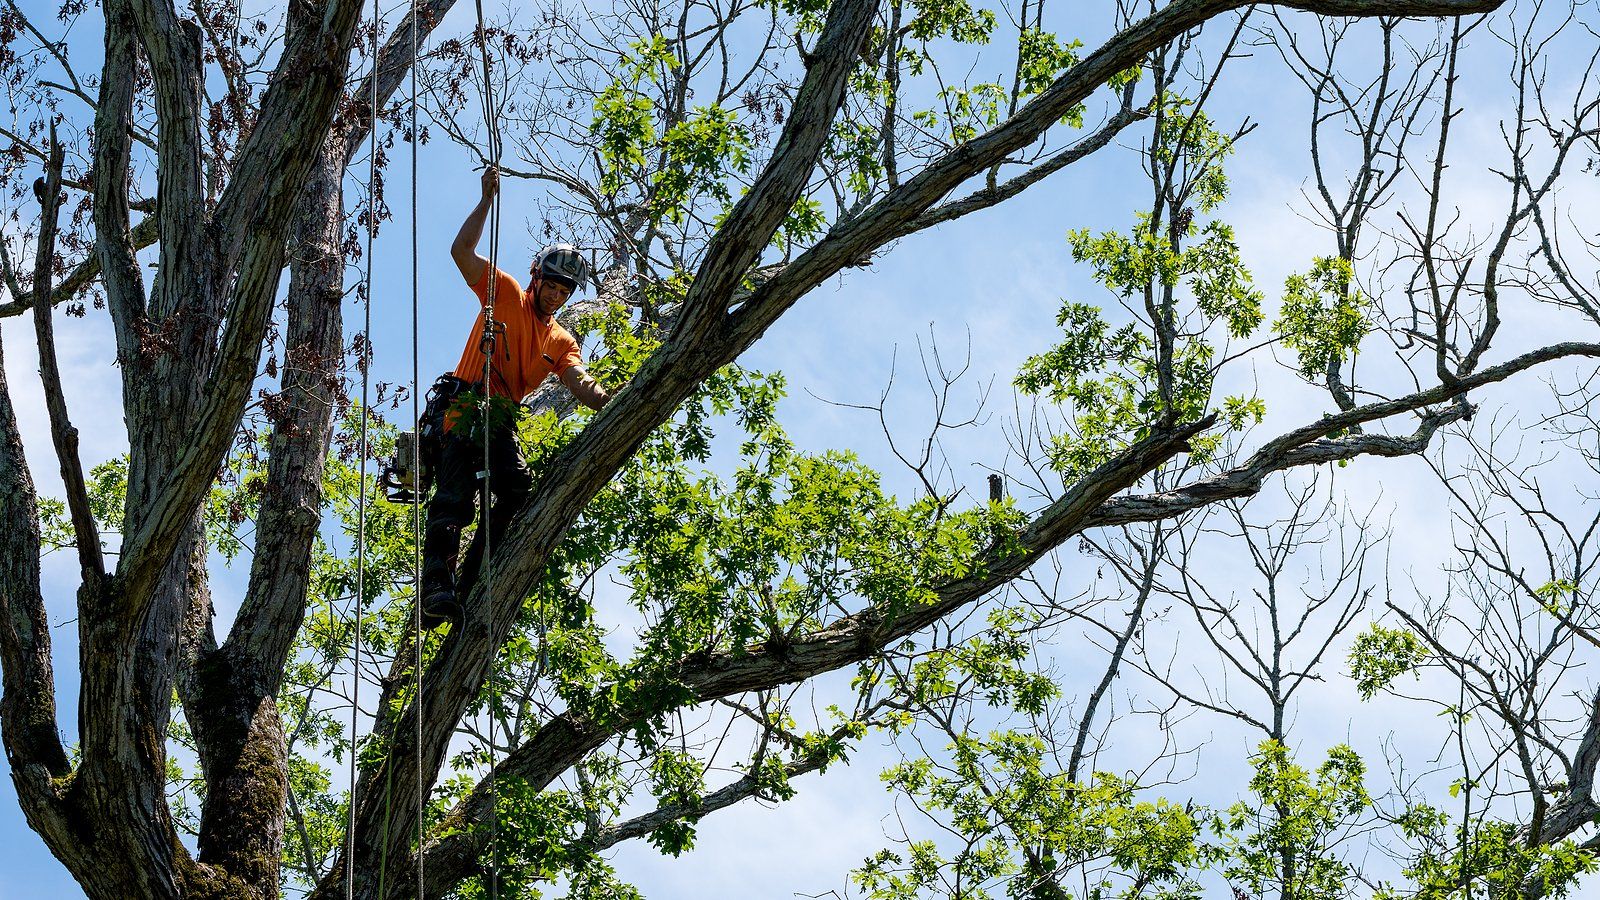 Tree Trimming Services Near You